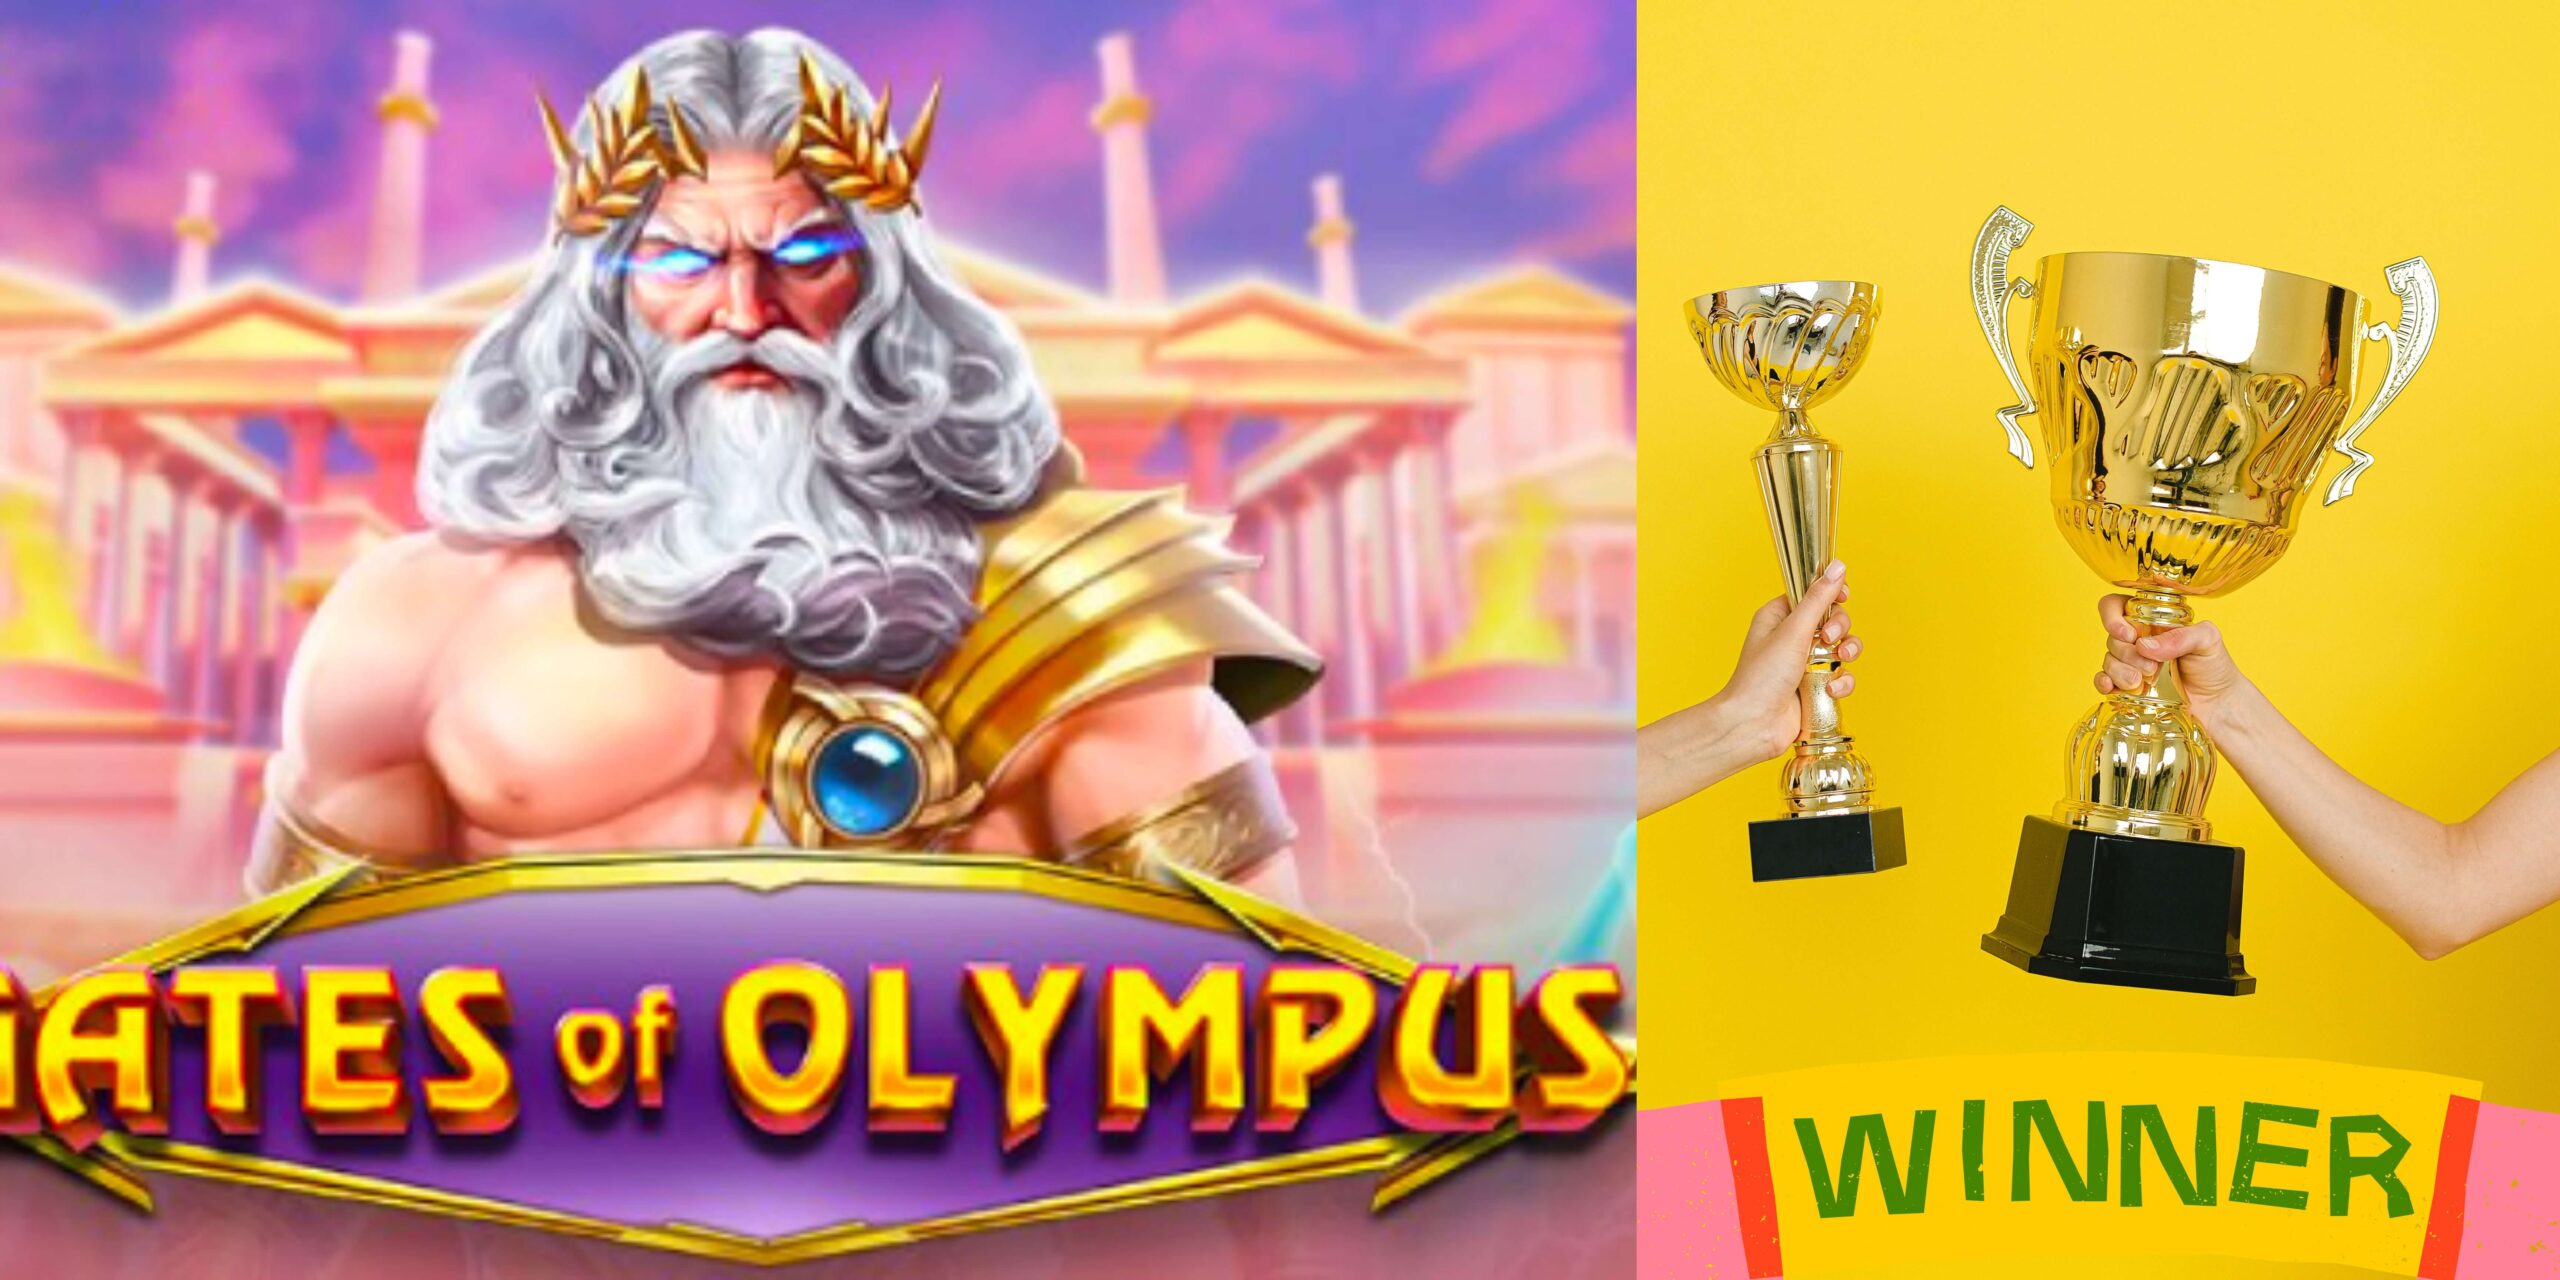 Gates of Olympus Wins Most Watched & Streamed Slot Award